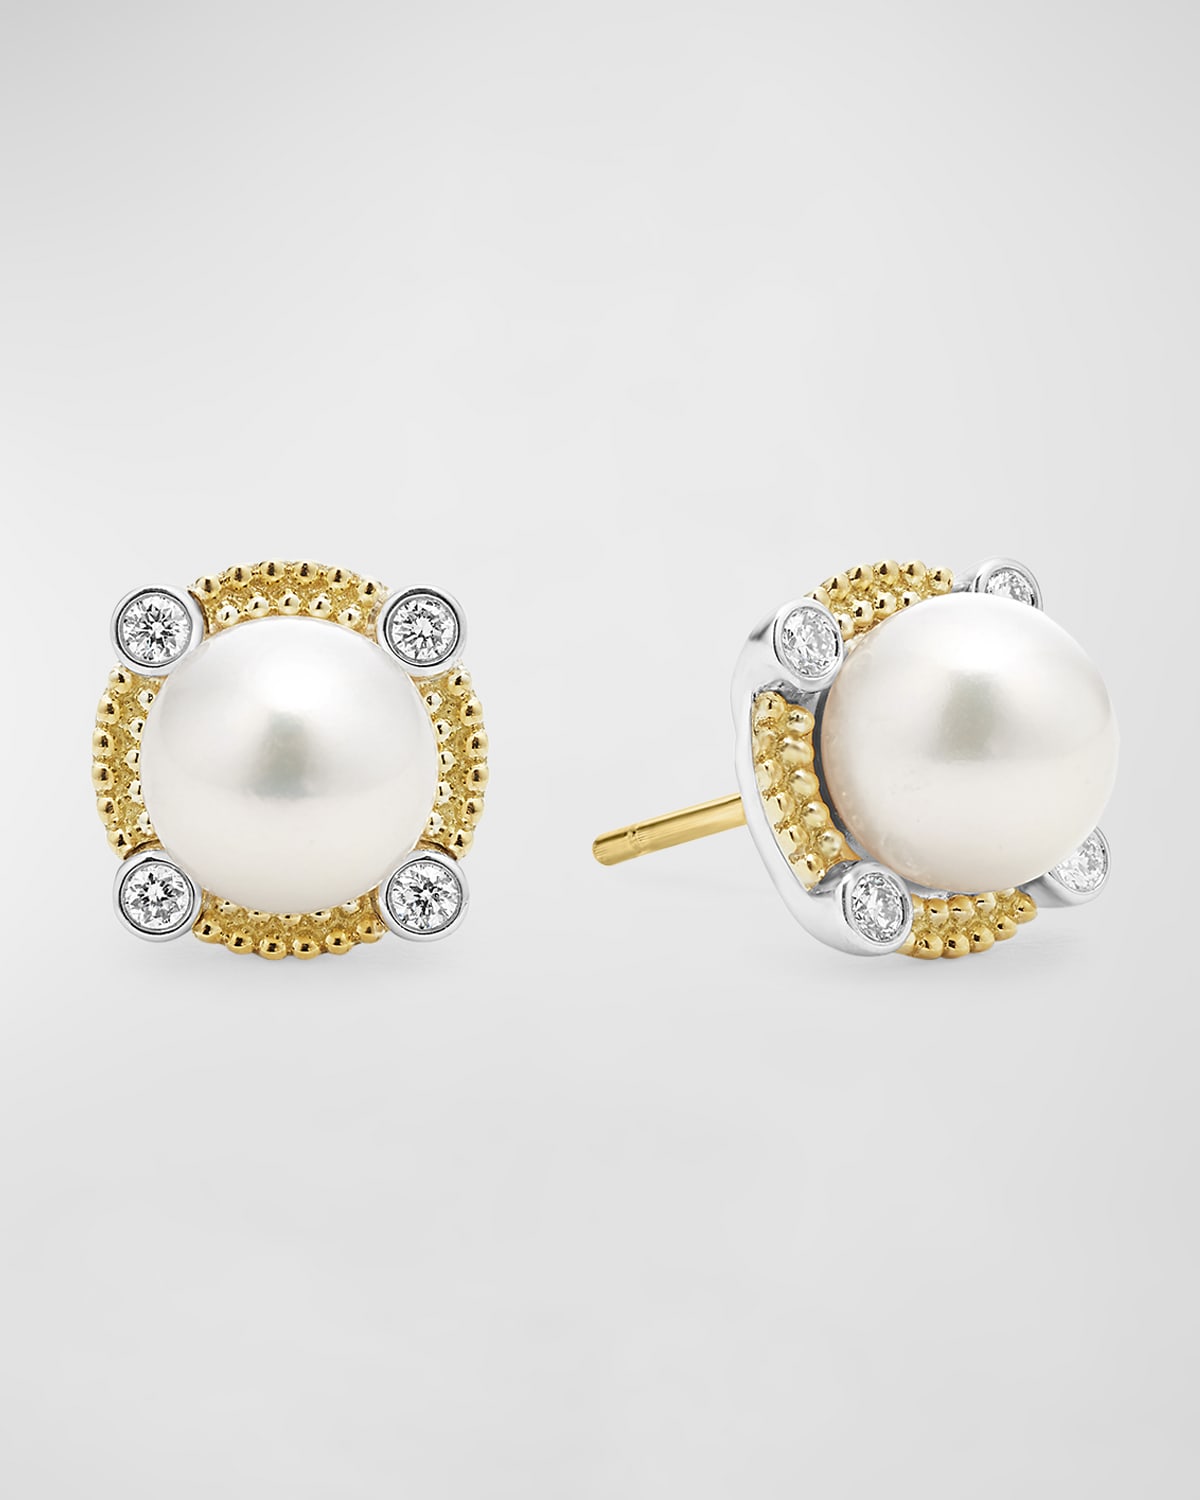 LAGOS STERLING SILVER AND 18K LUNA PEARL LUX WITH DIAMOND STUD EARRINGS